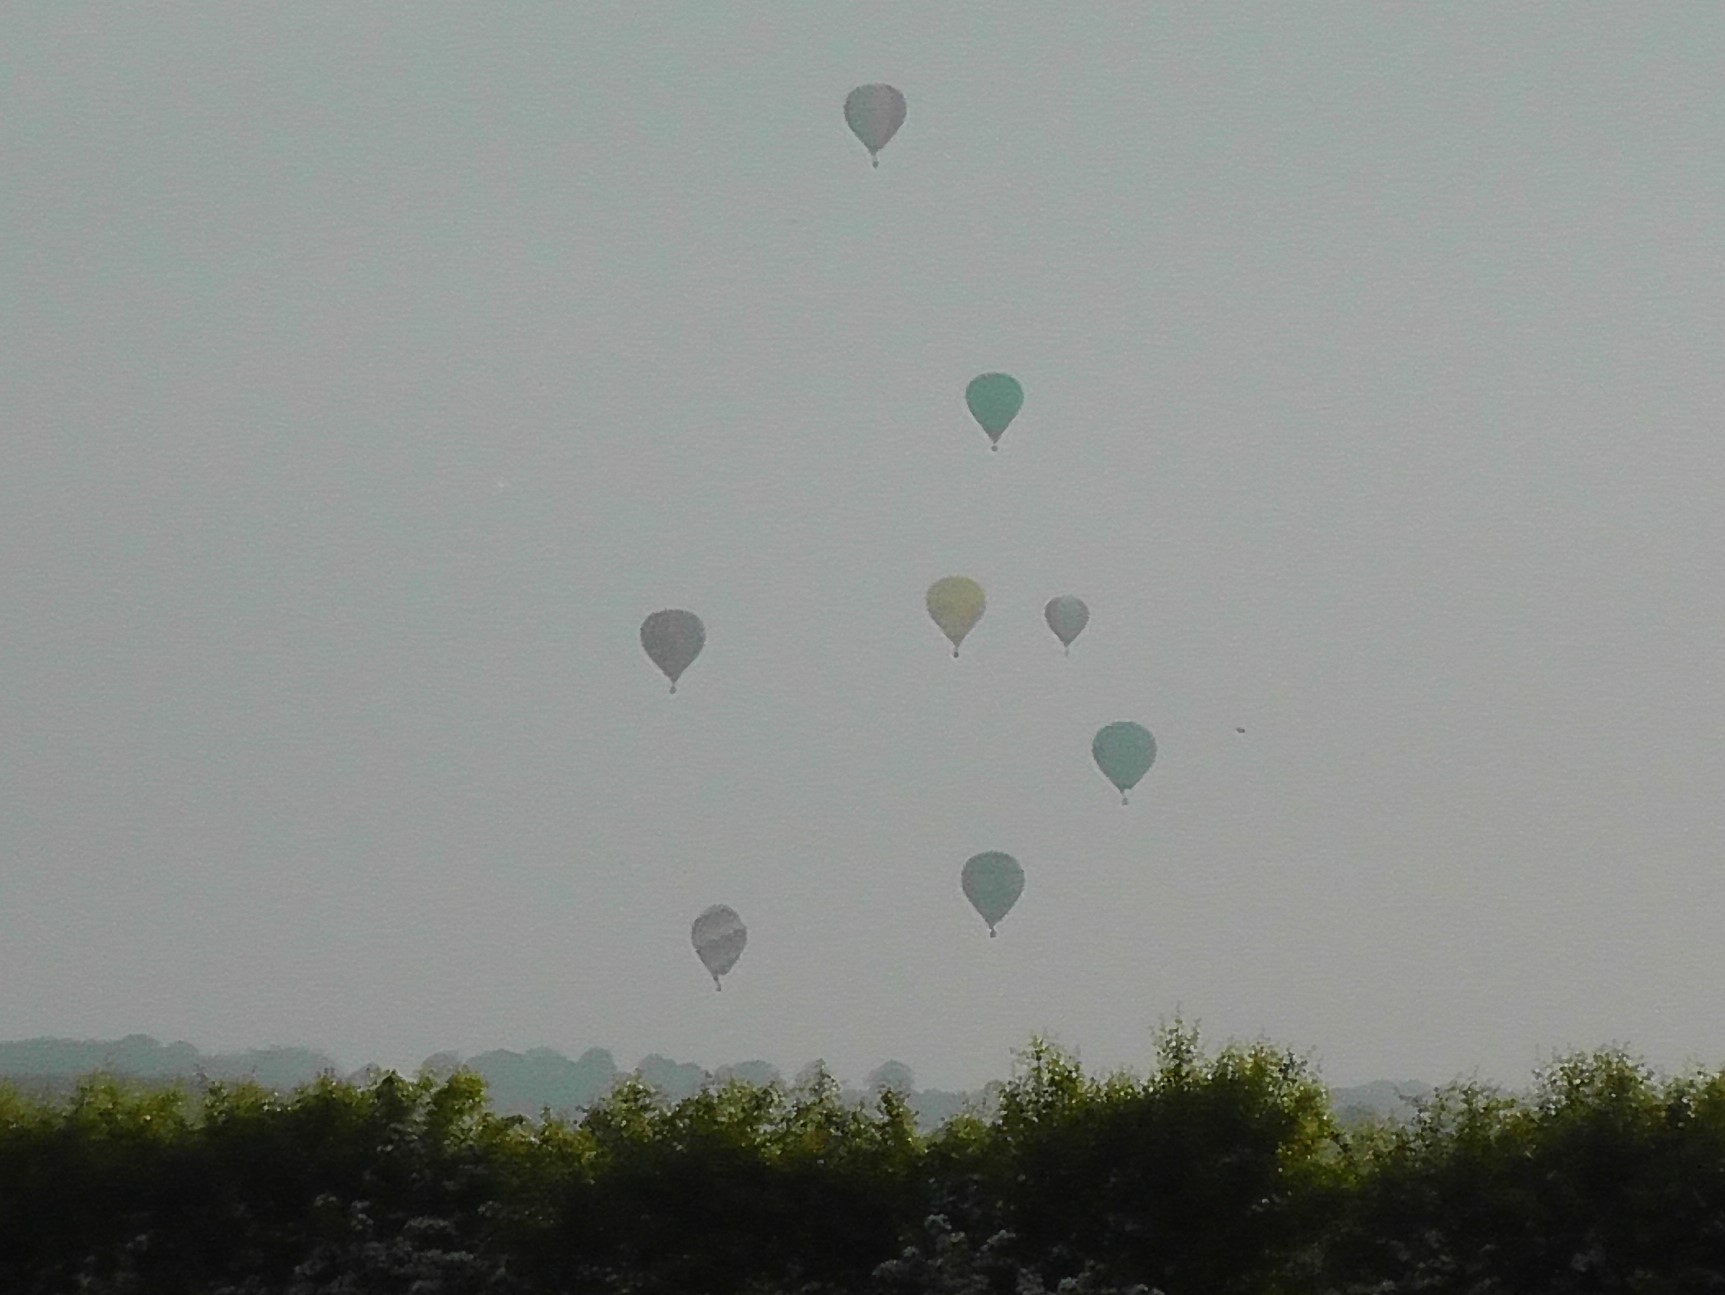 Balloons over Cholmondely, May 29th